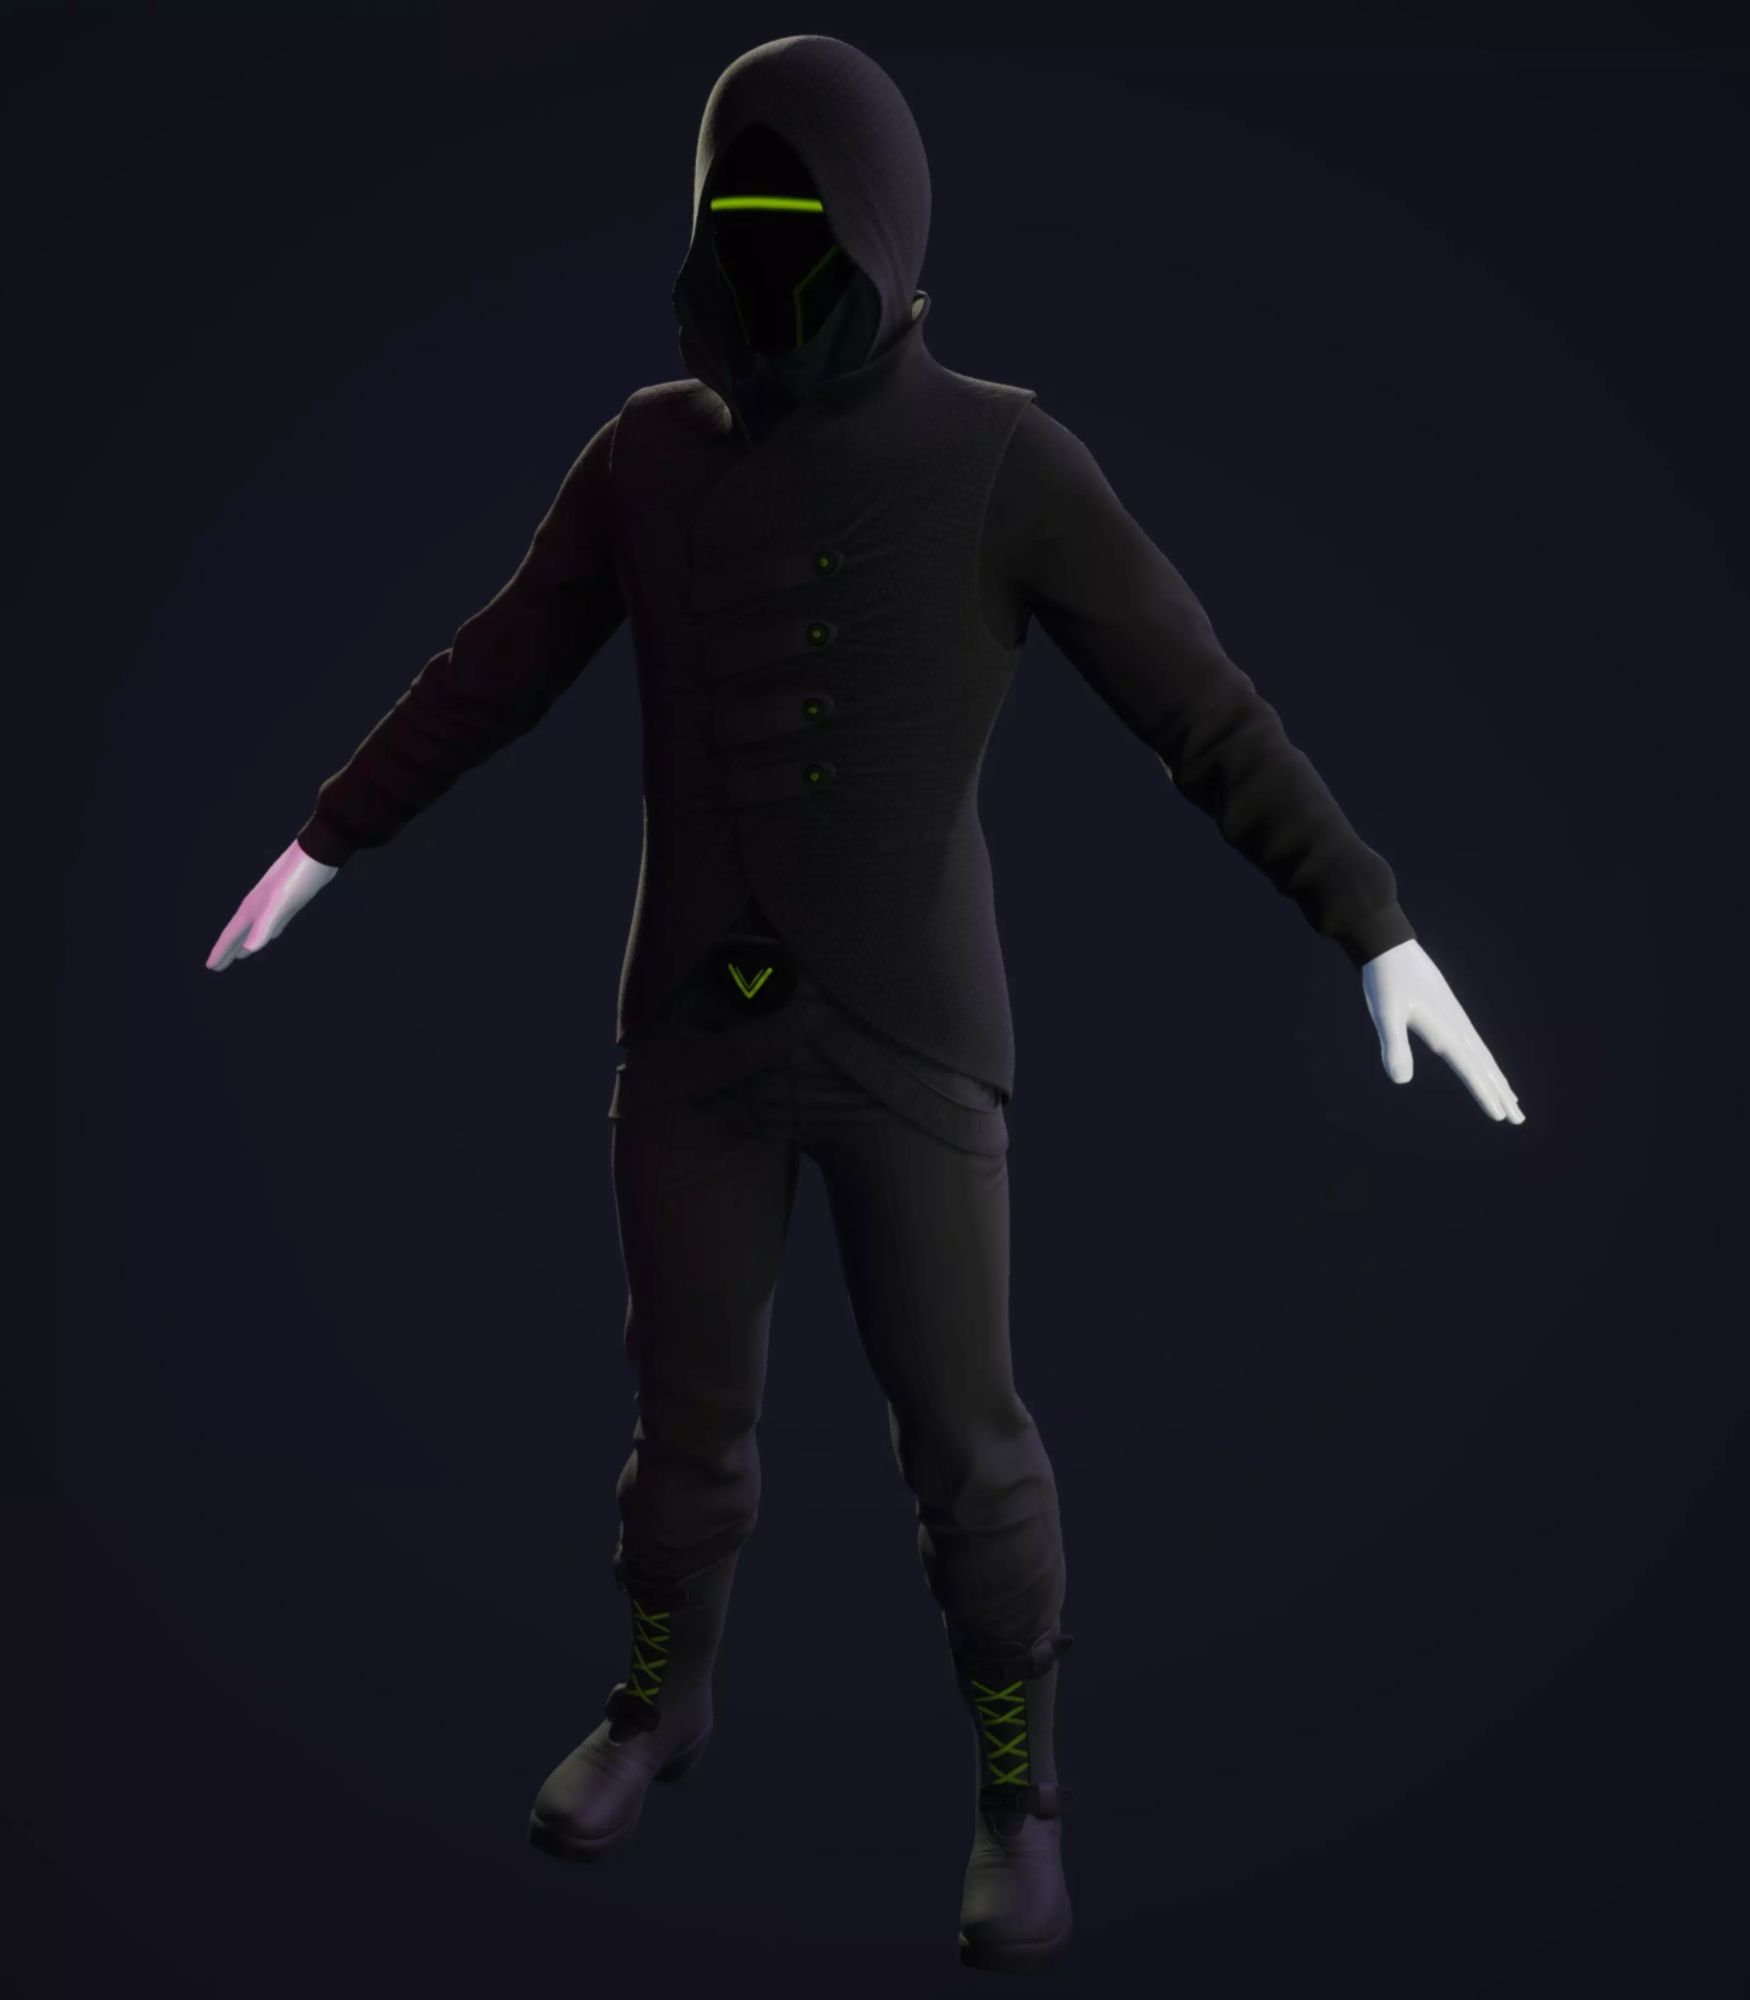 Sci-fi assassin outfit male from Tafi is a full black outfit with neon green linings